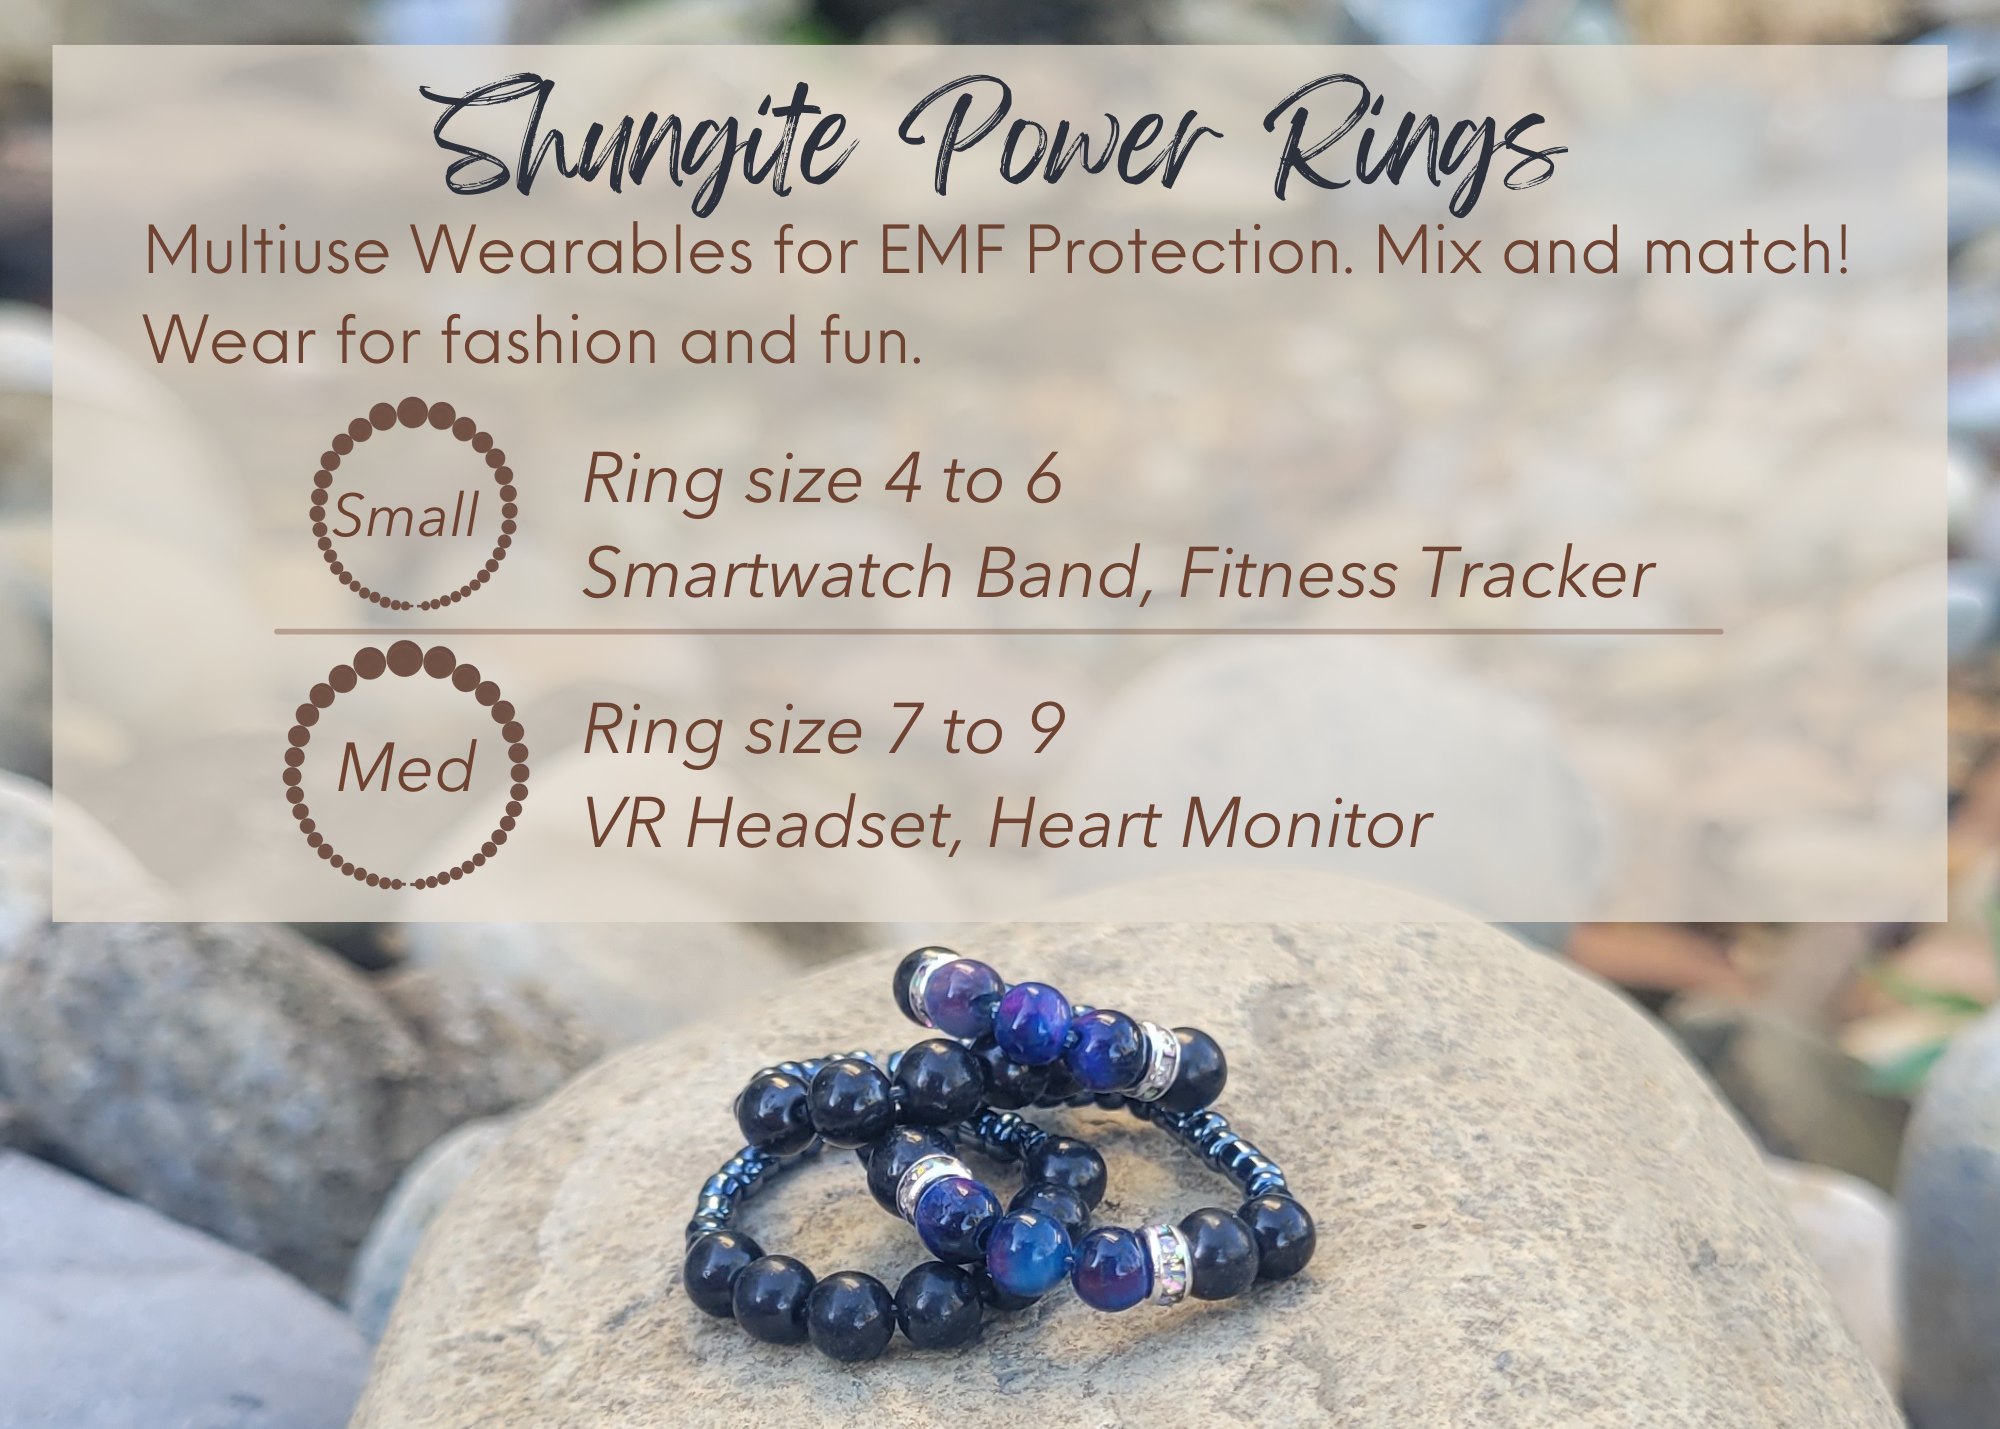 Shungite Power Rings for Jewelry, Smart Watches, Oculus and Smart Rings